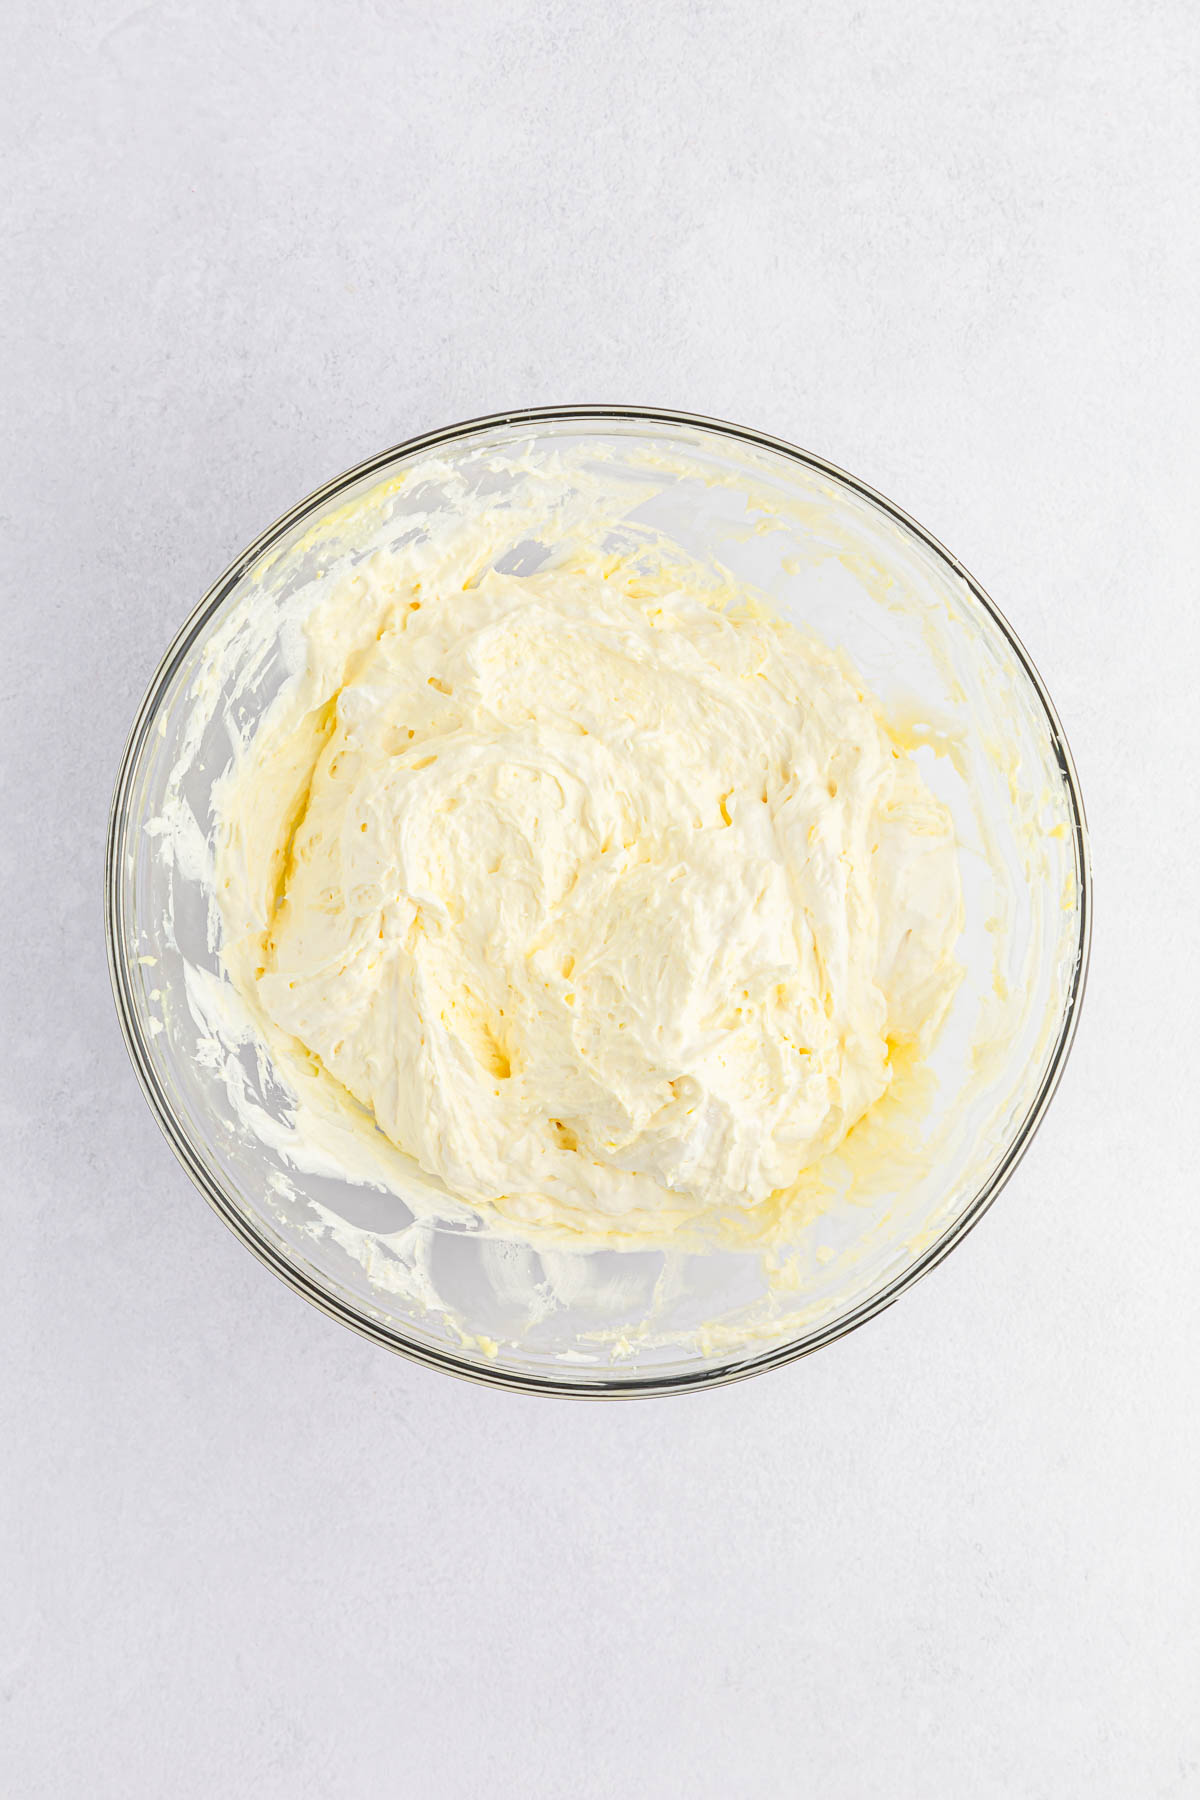 Cool Whip and cream cheese mixture blended